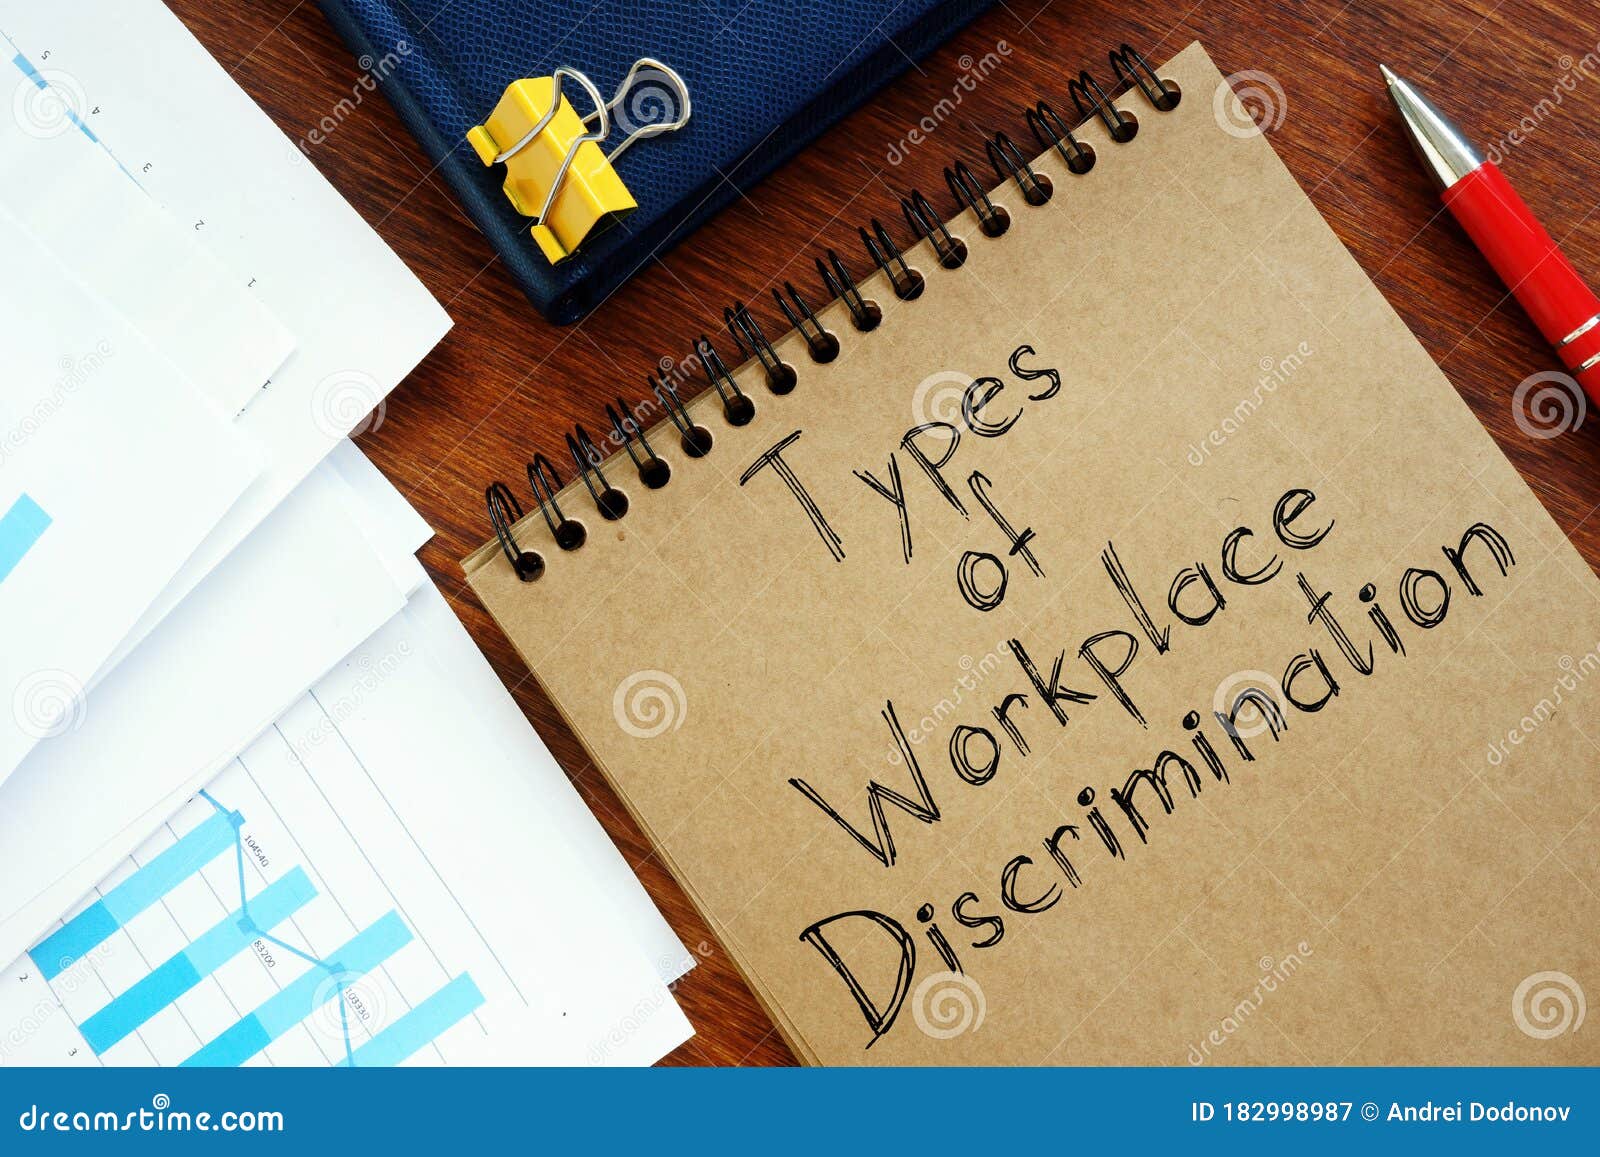 types of workplace discrimination are shown on the conceptual photo